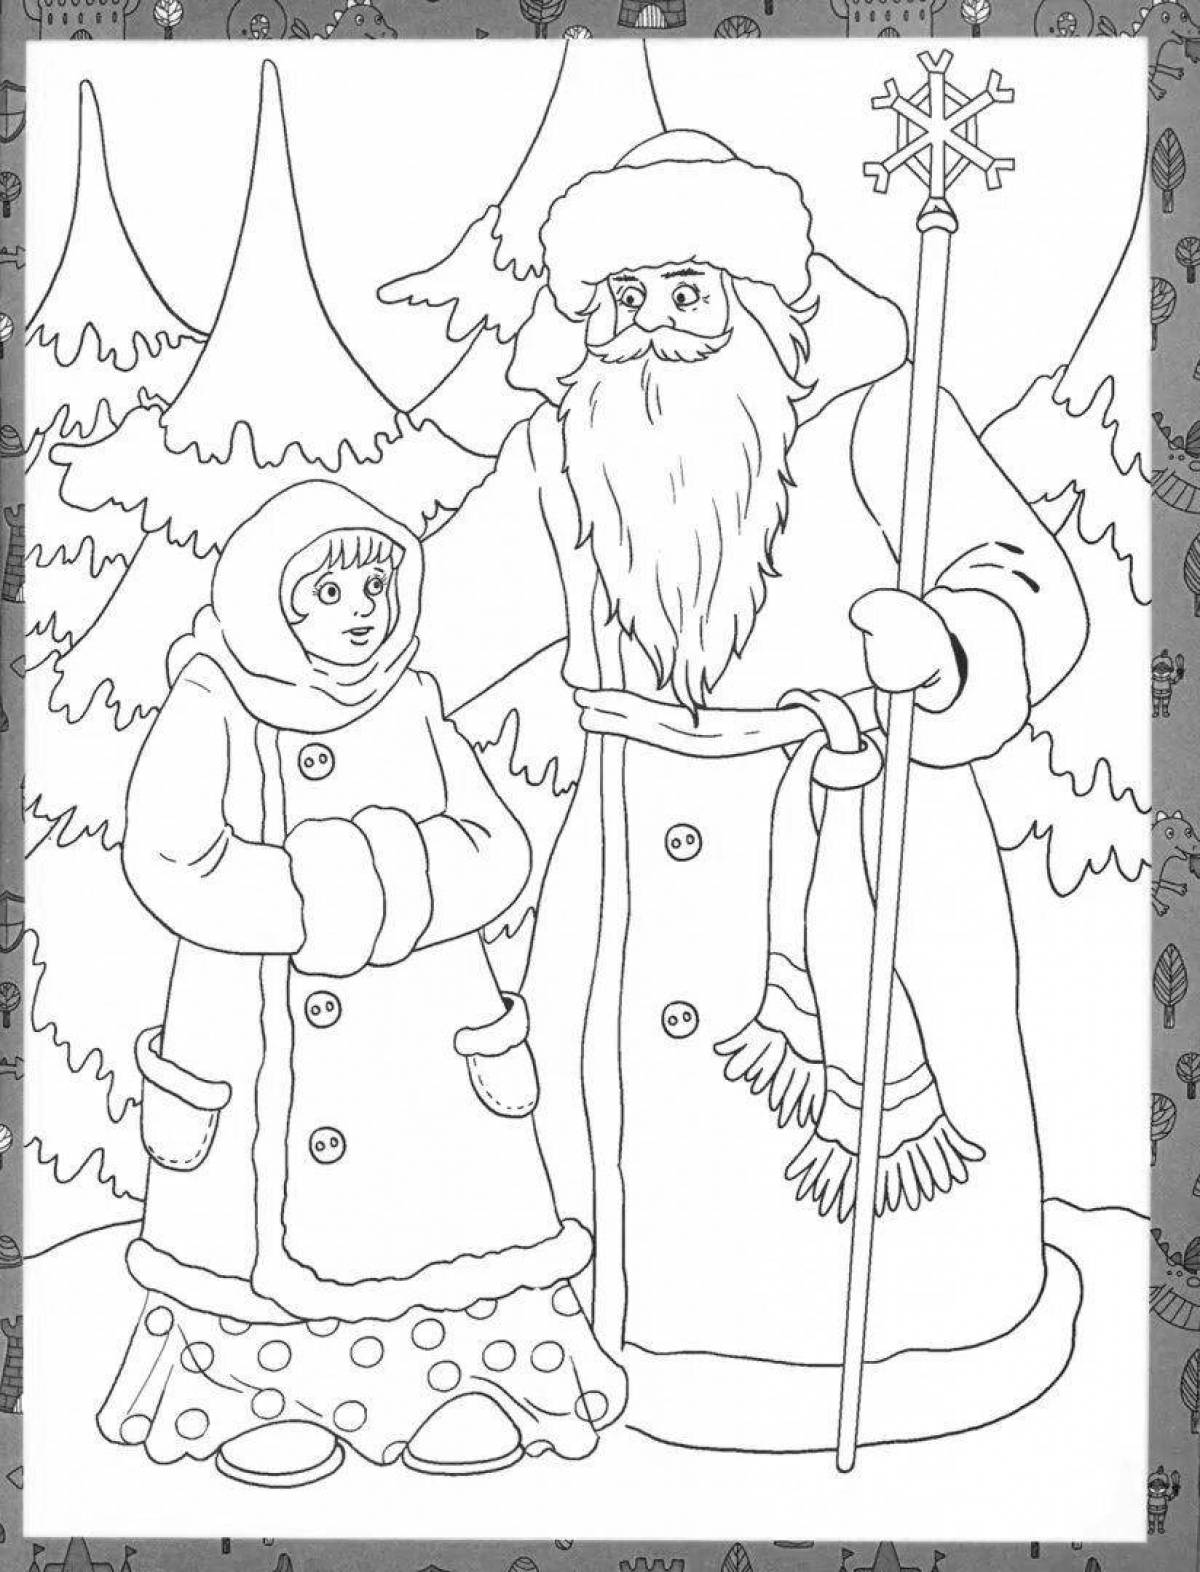 A wonderful coloring book for the fairy tale frost